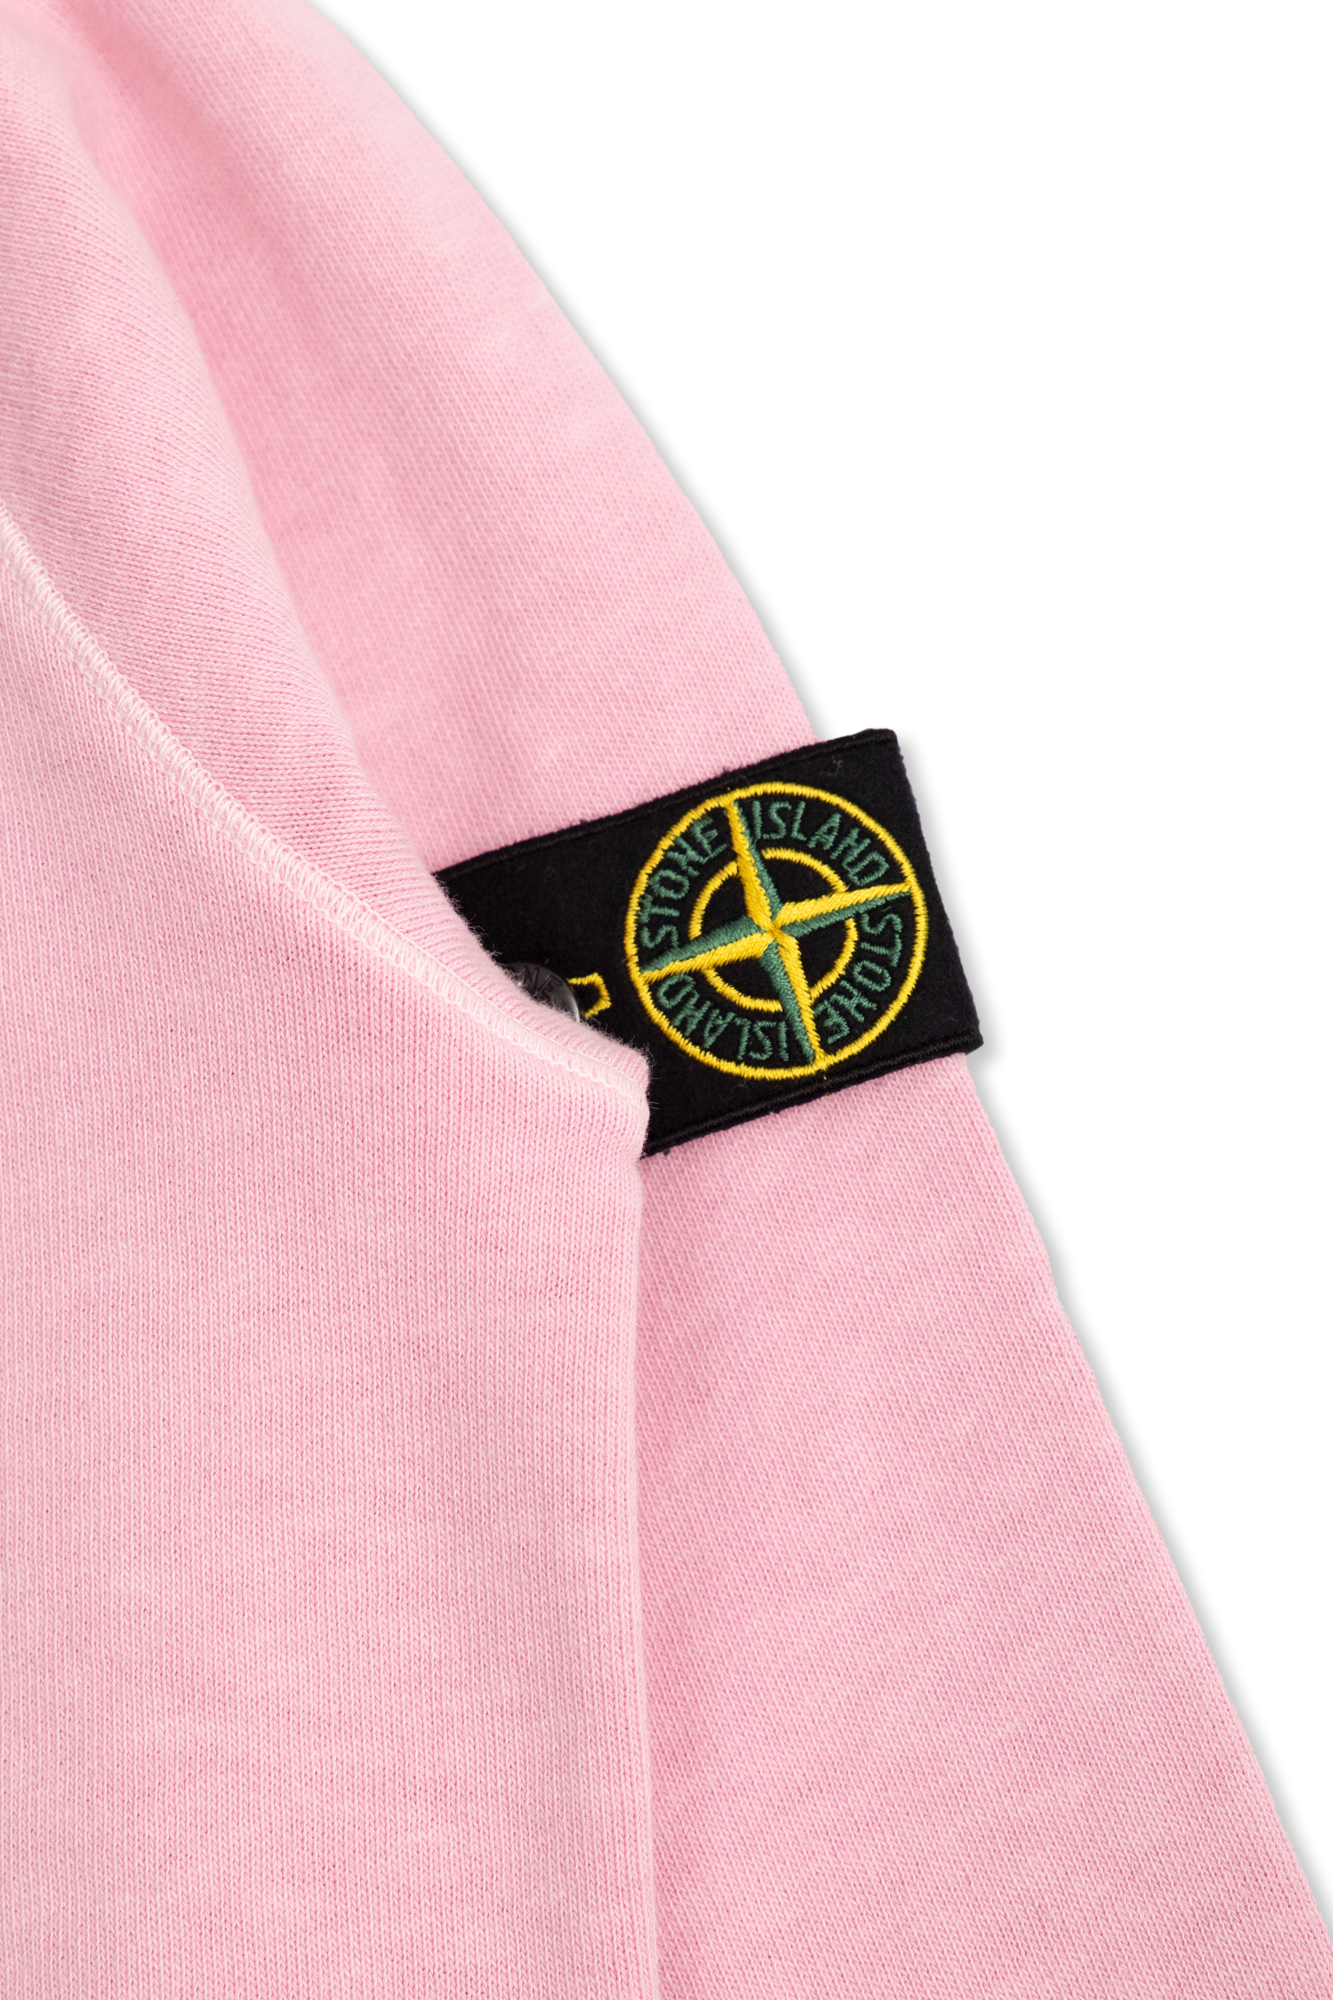 Stone Island Kids Shirts are really challenging to iron easy iron shirts are much better